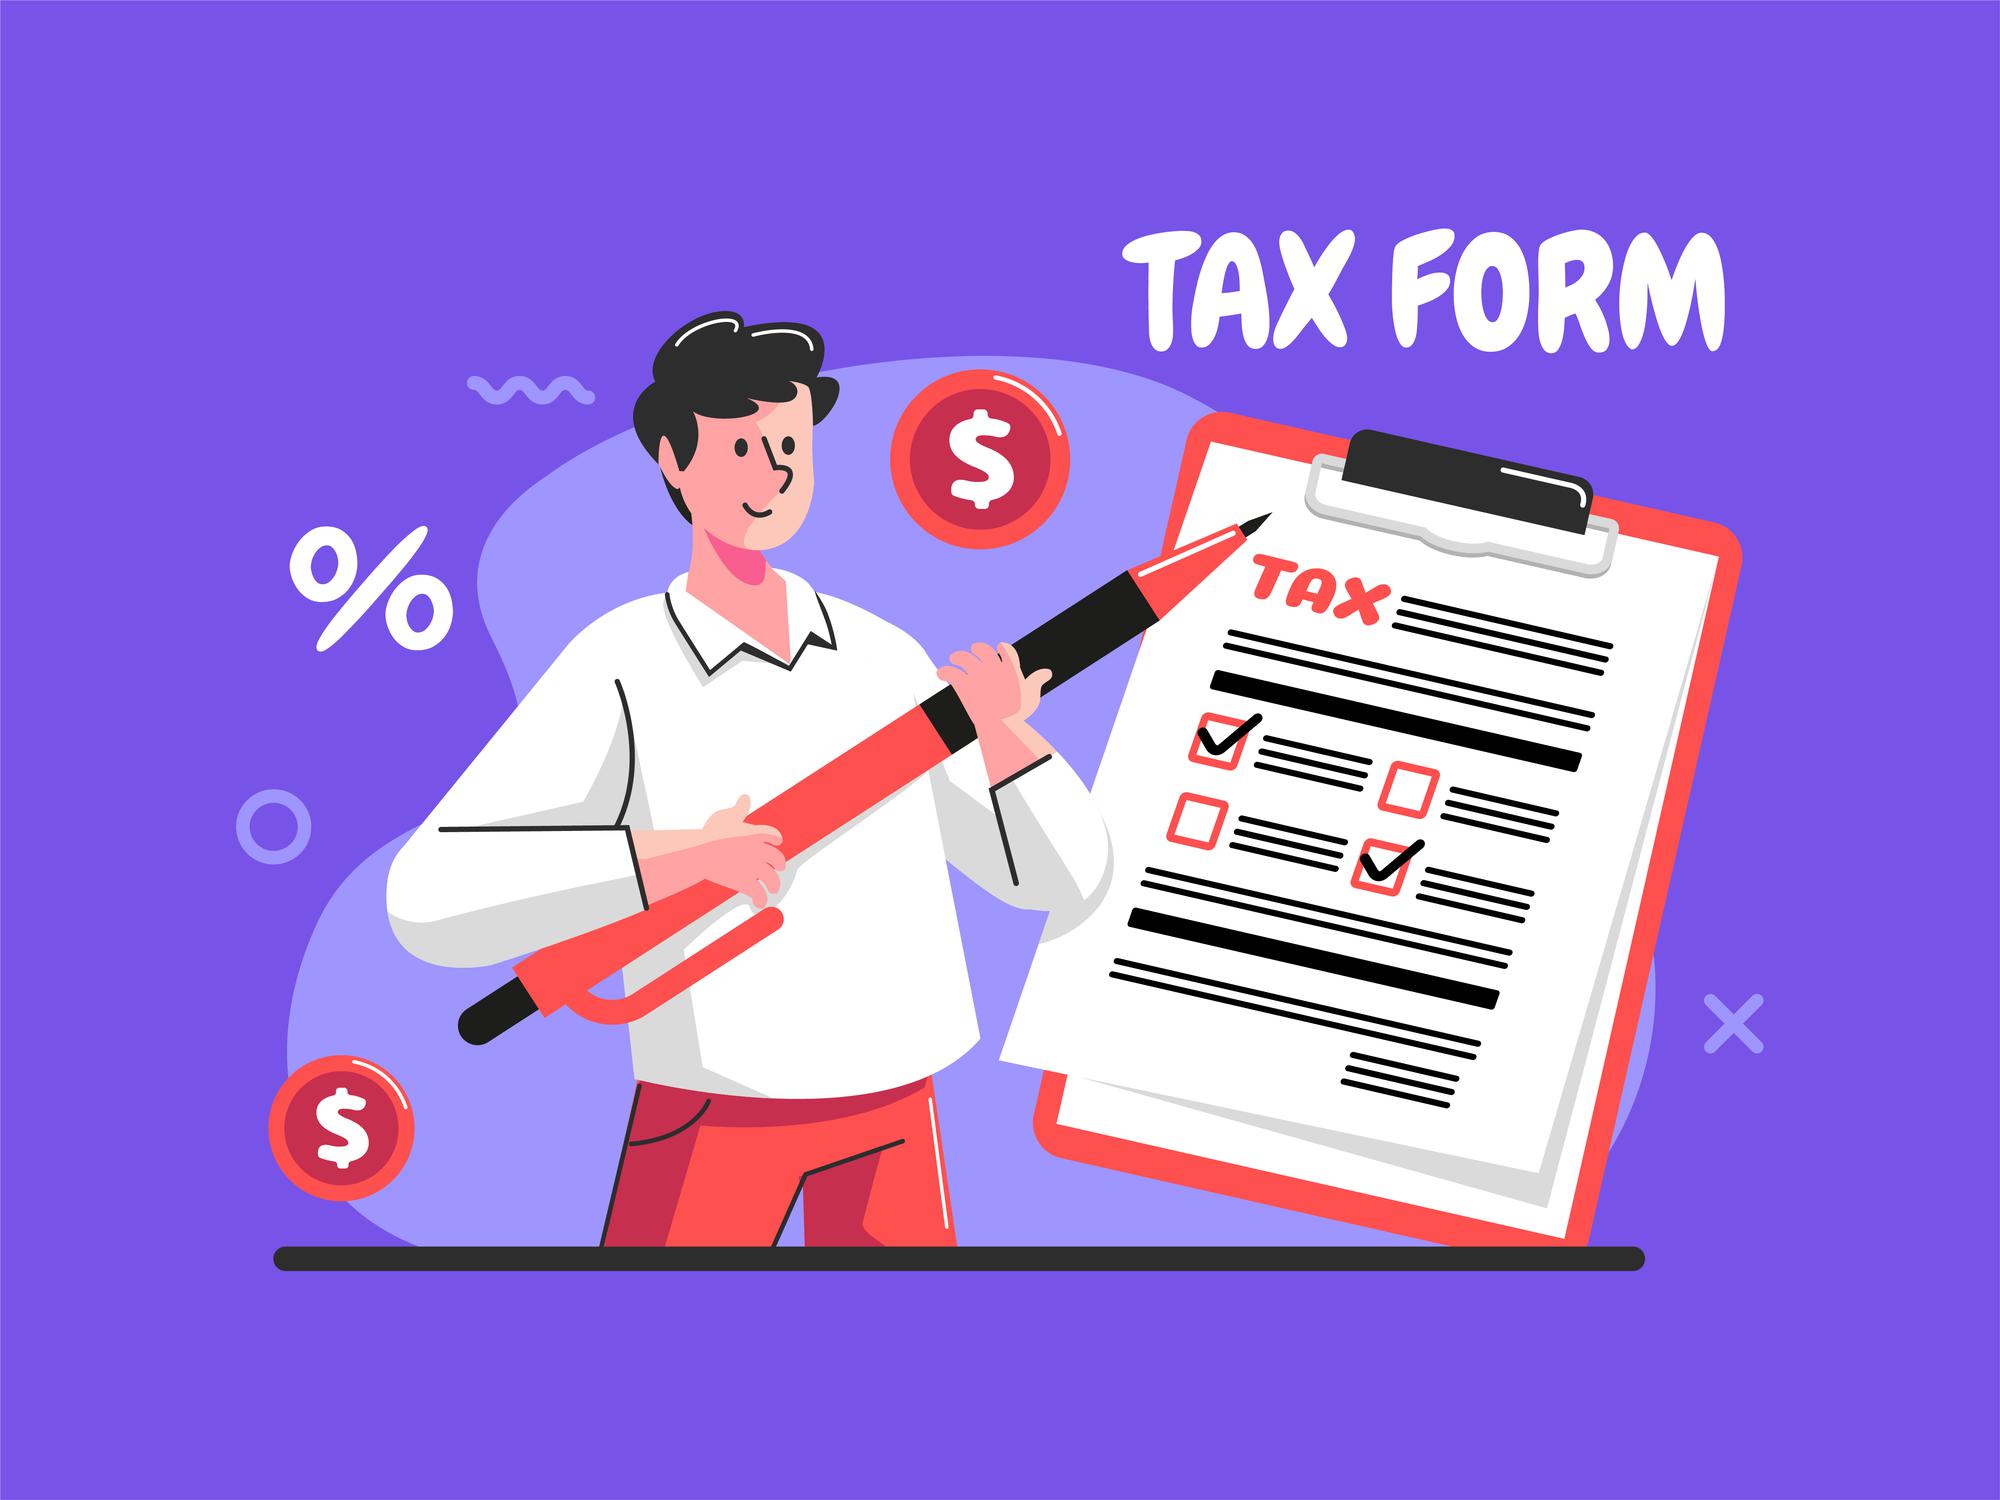 5 Things To Keep In Mind When Submitting Tax Returns In 2022